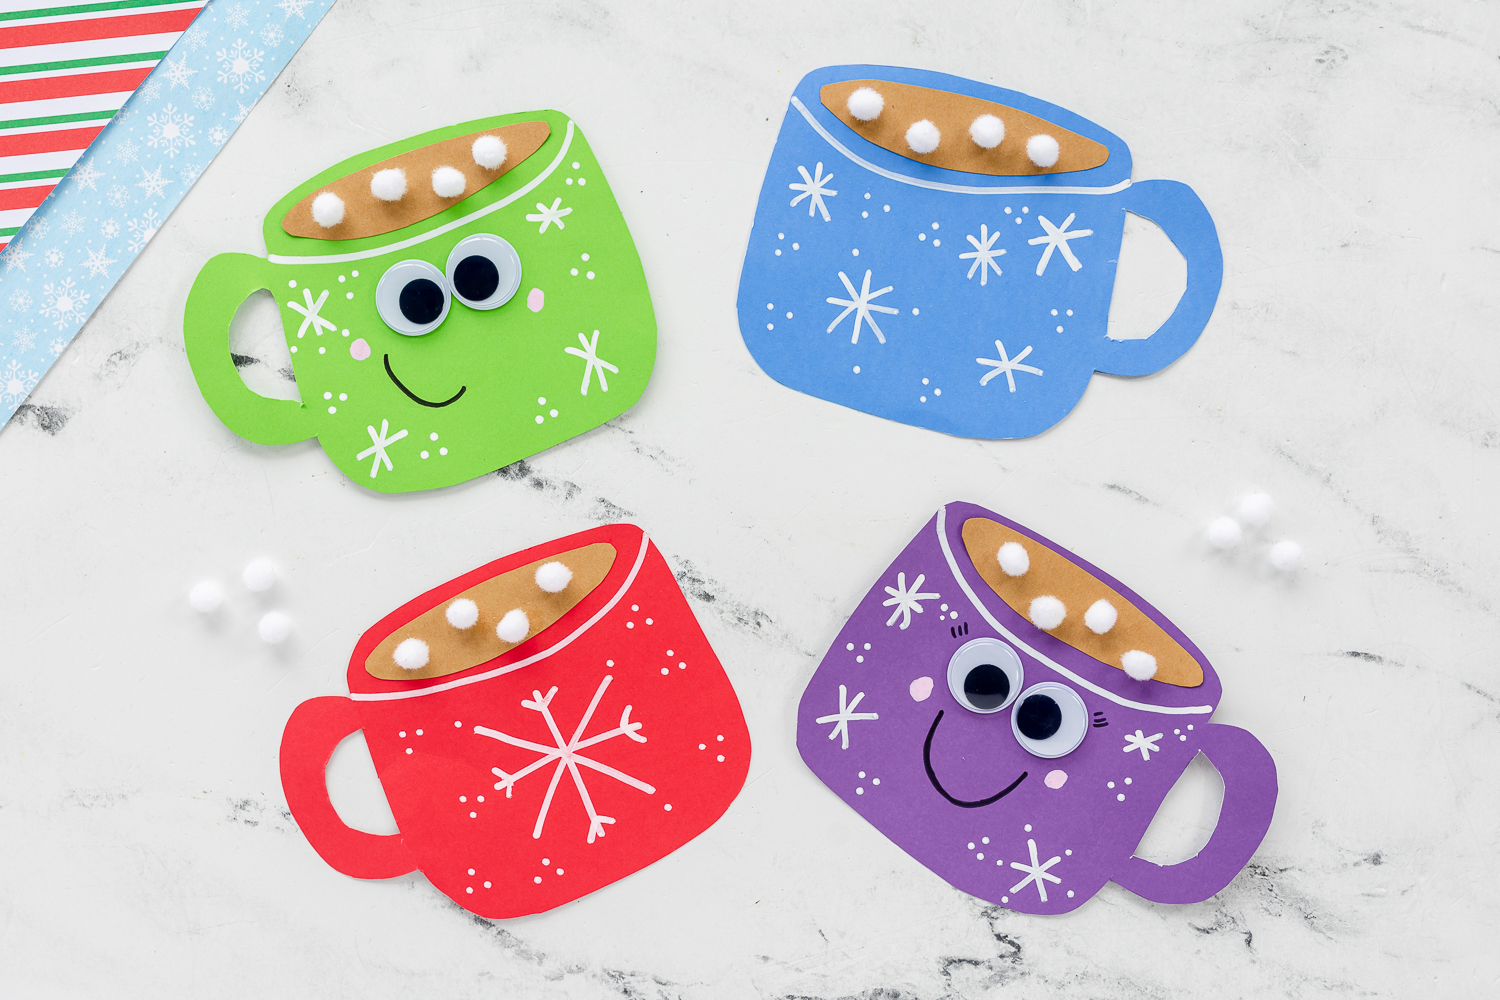 cardstock cut into mug shape with hand drawn white snowflakes